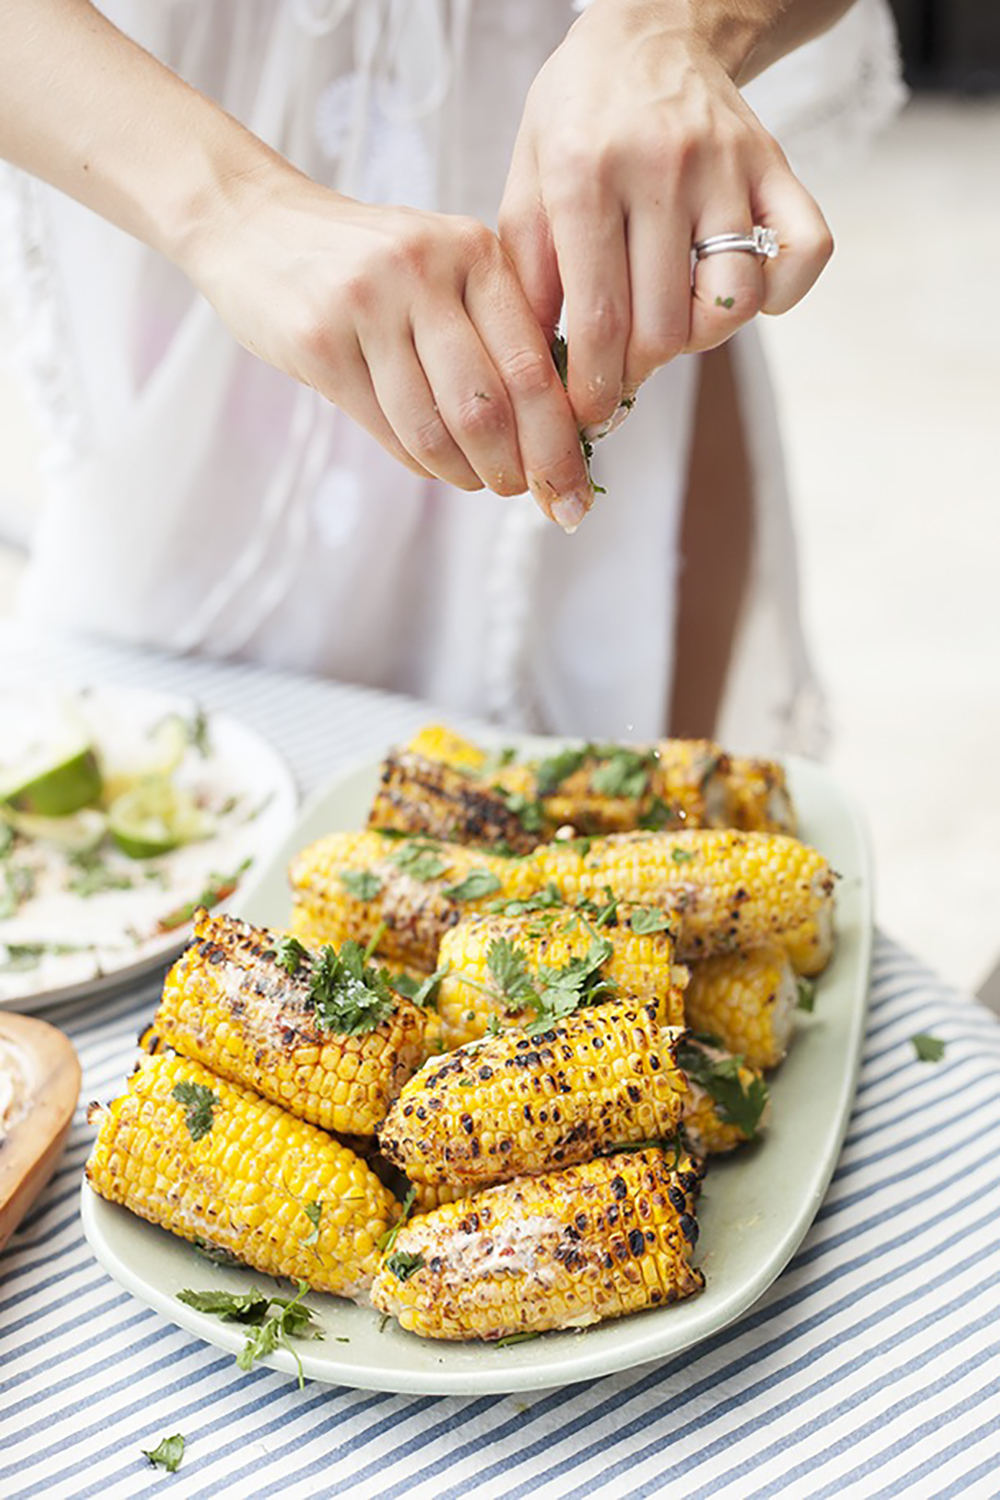 Get serious about corn on the cob.